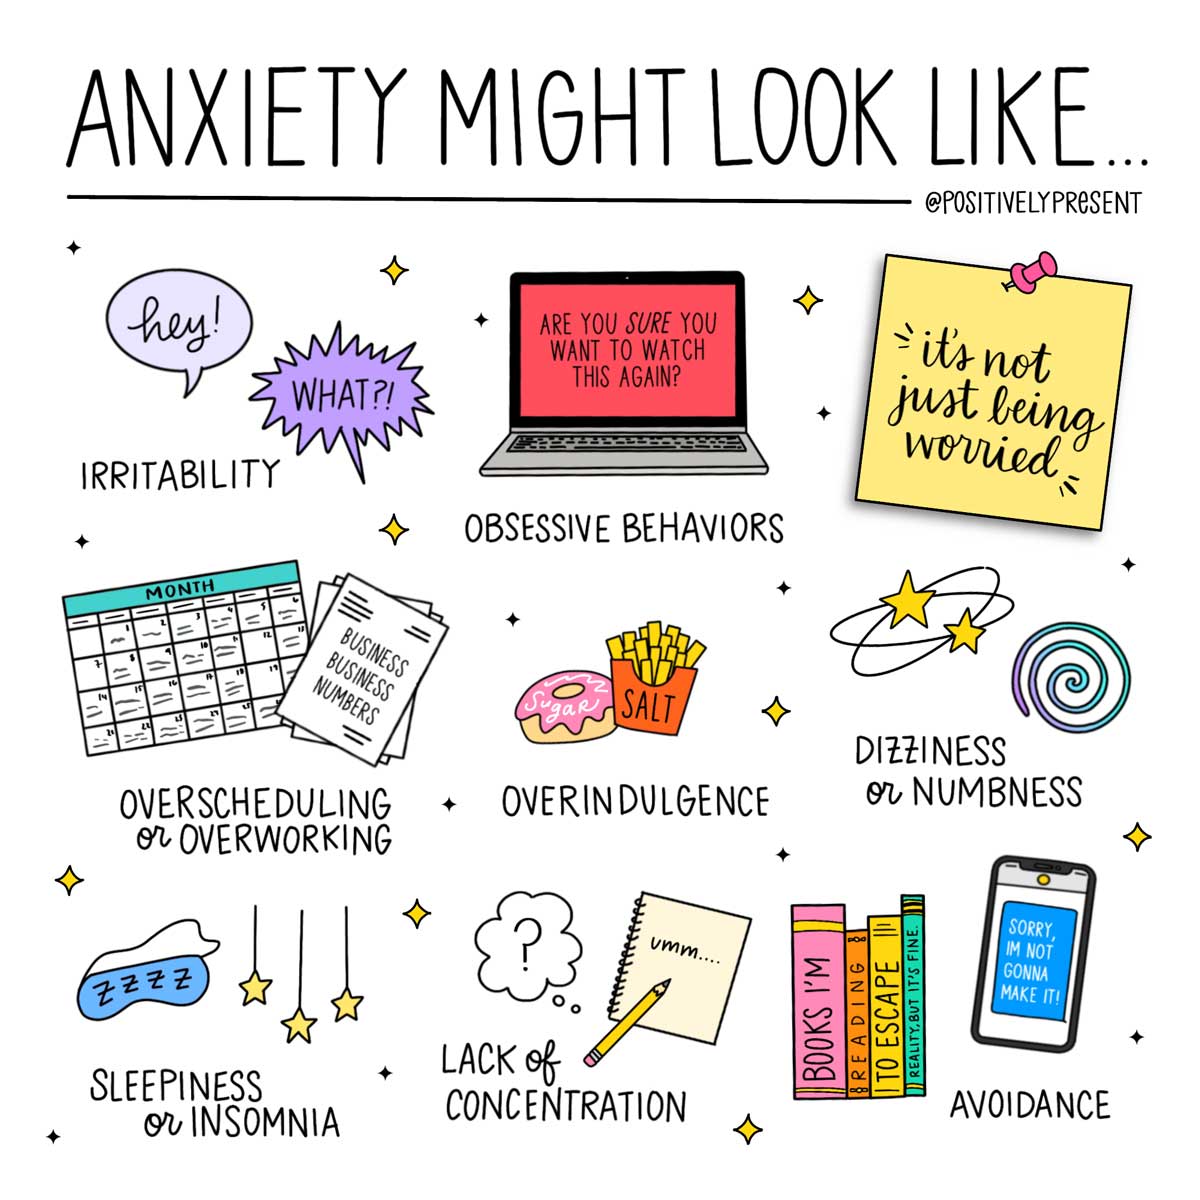 drawings of ways we express anxiety, like irritability and avoidance.